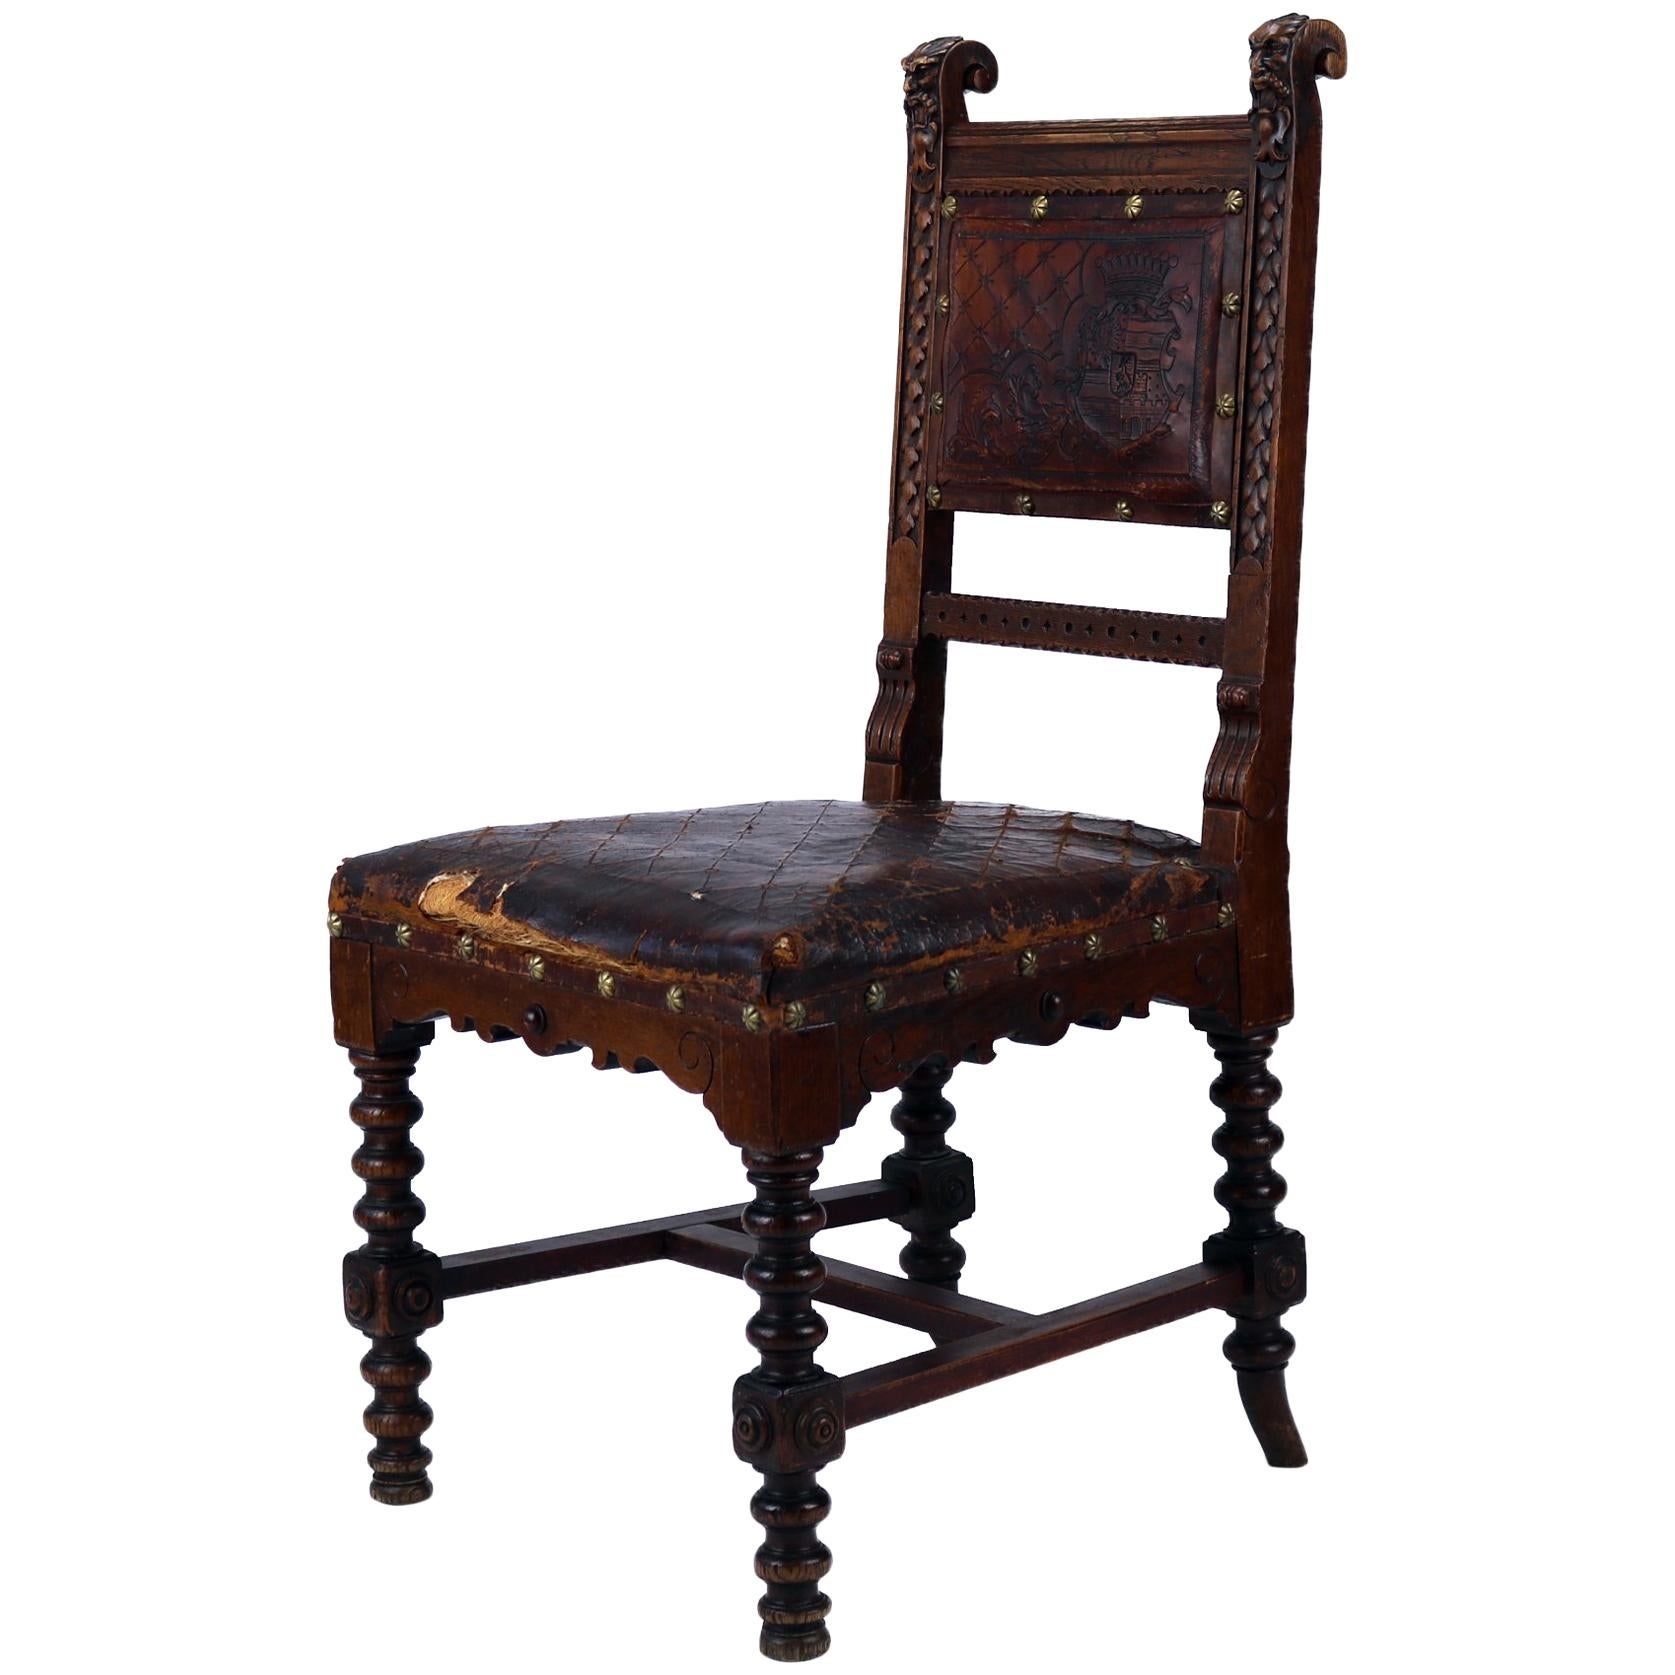 Reanaissance Revival Hand-Carved Chair with Embossed Leather 19th Century